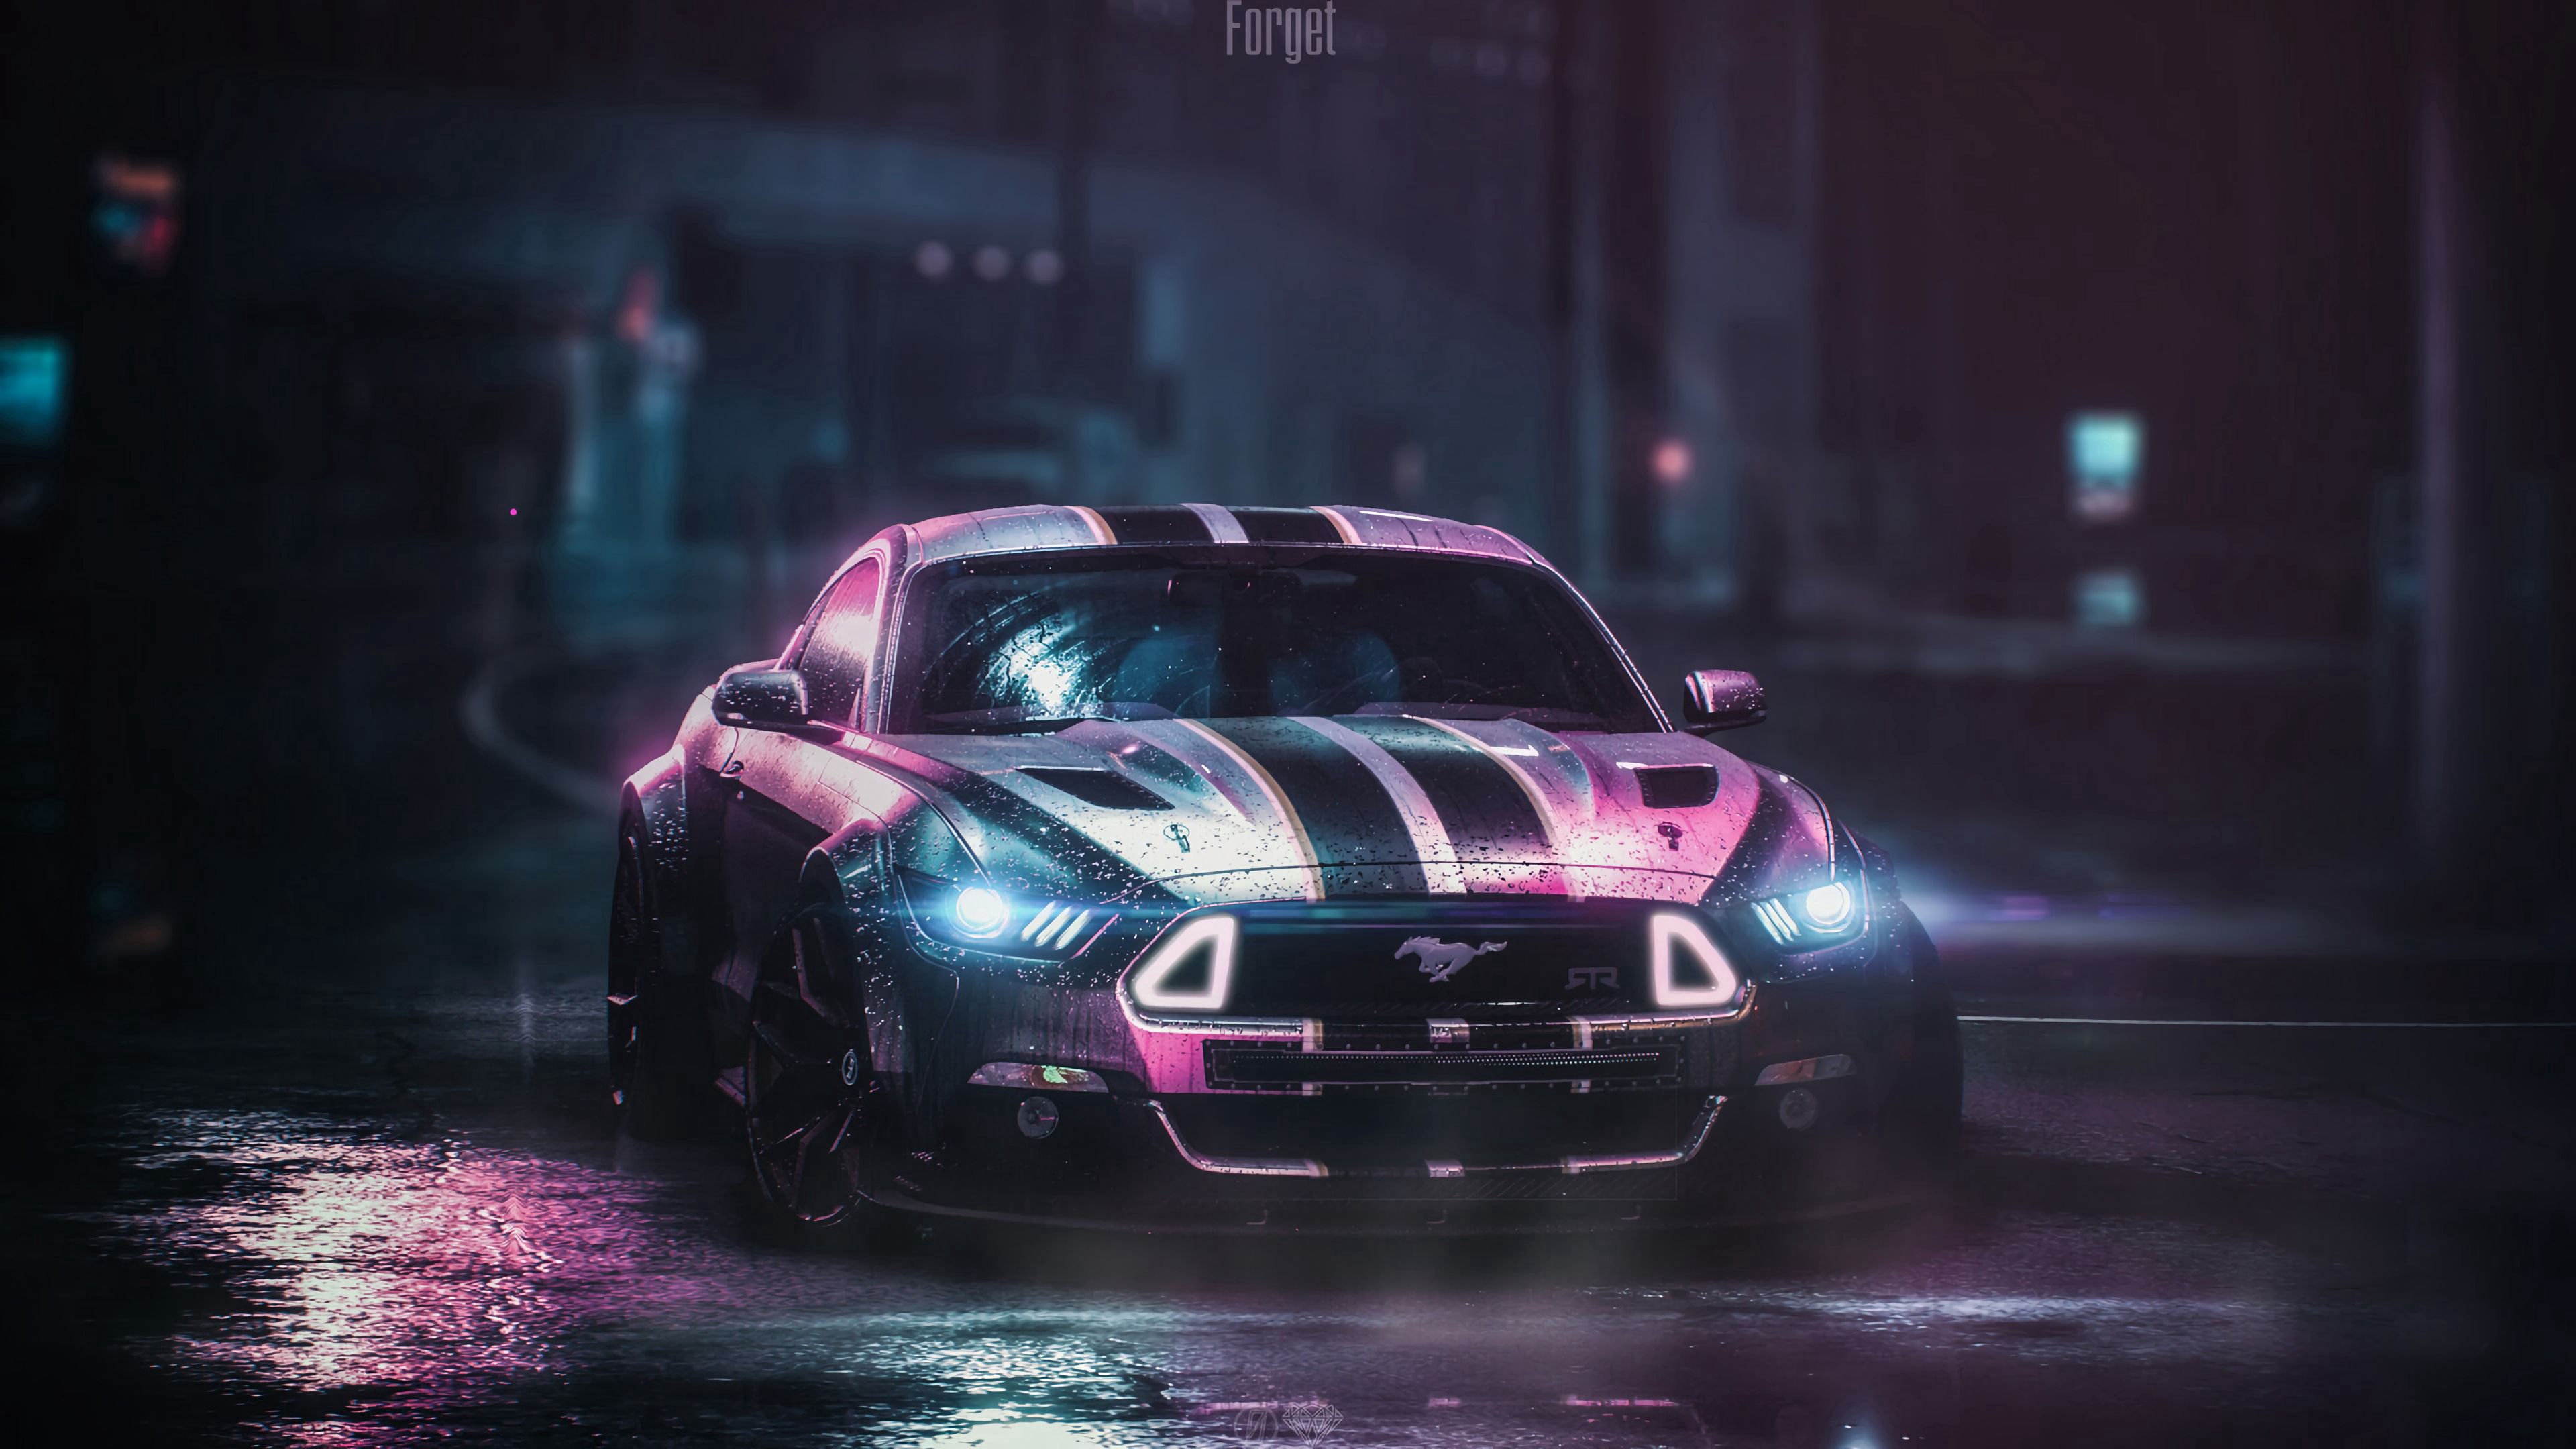 Wallpaper / ford mustang gtr, ford, car, neon, night, wet, 4k free download